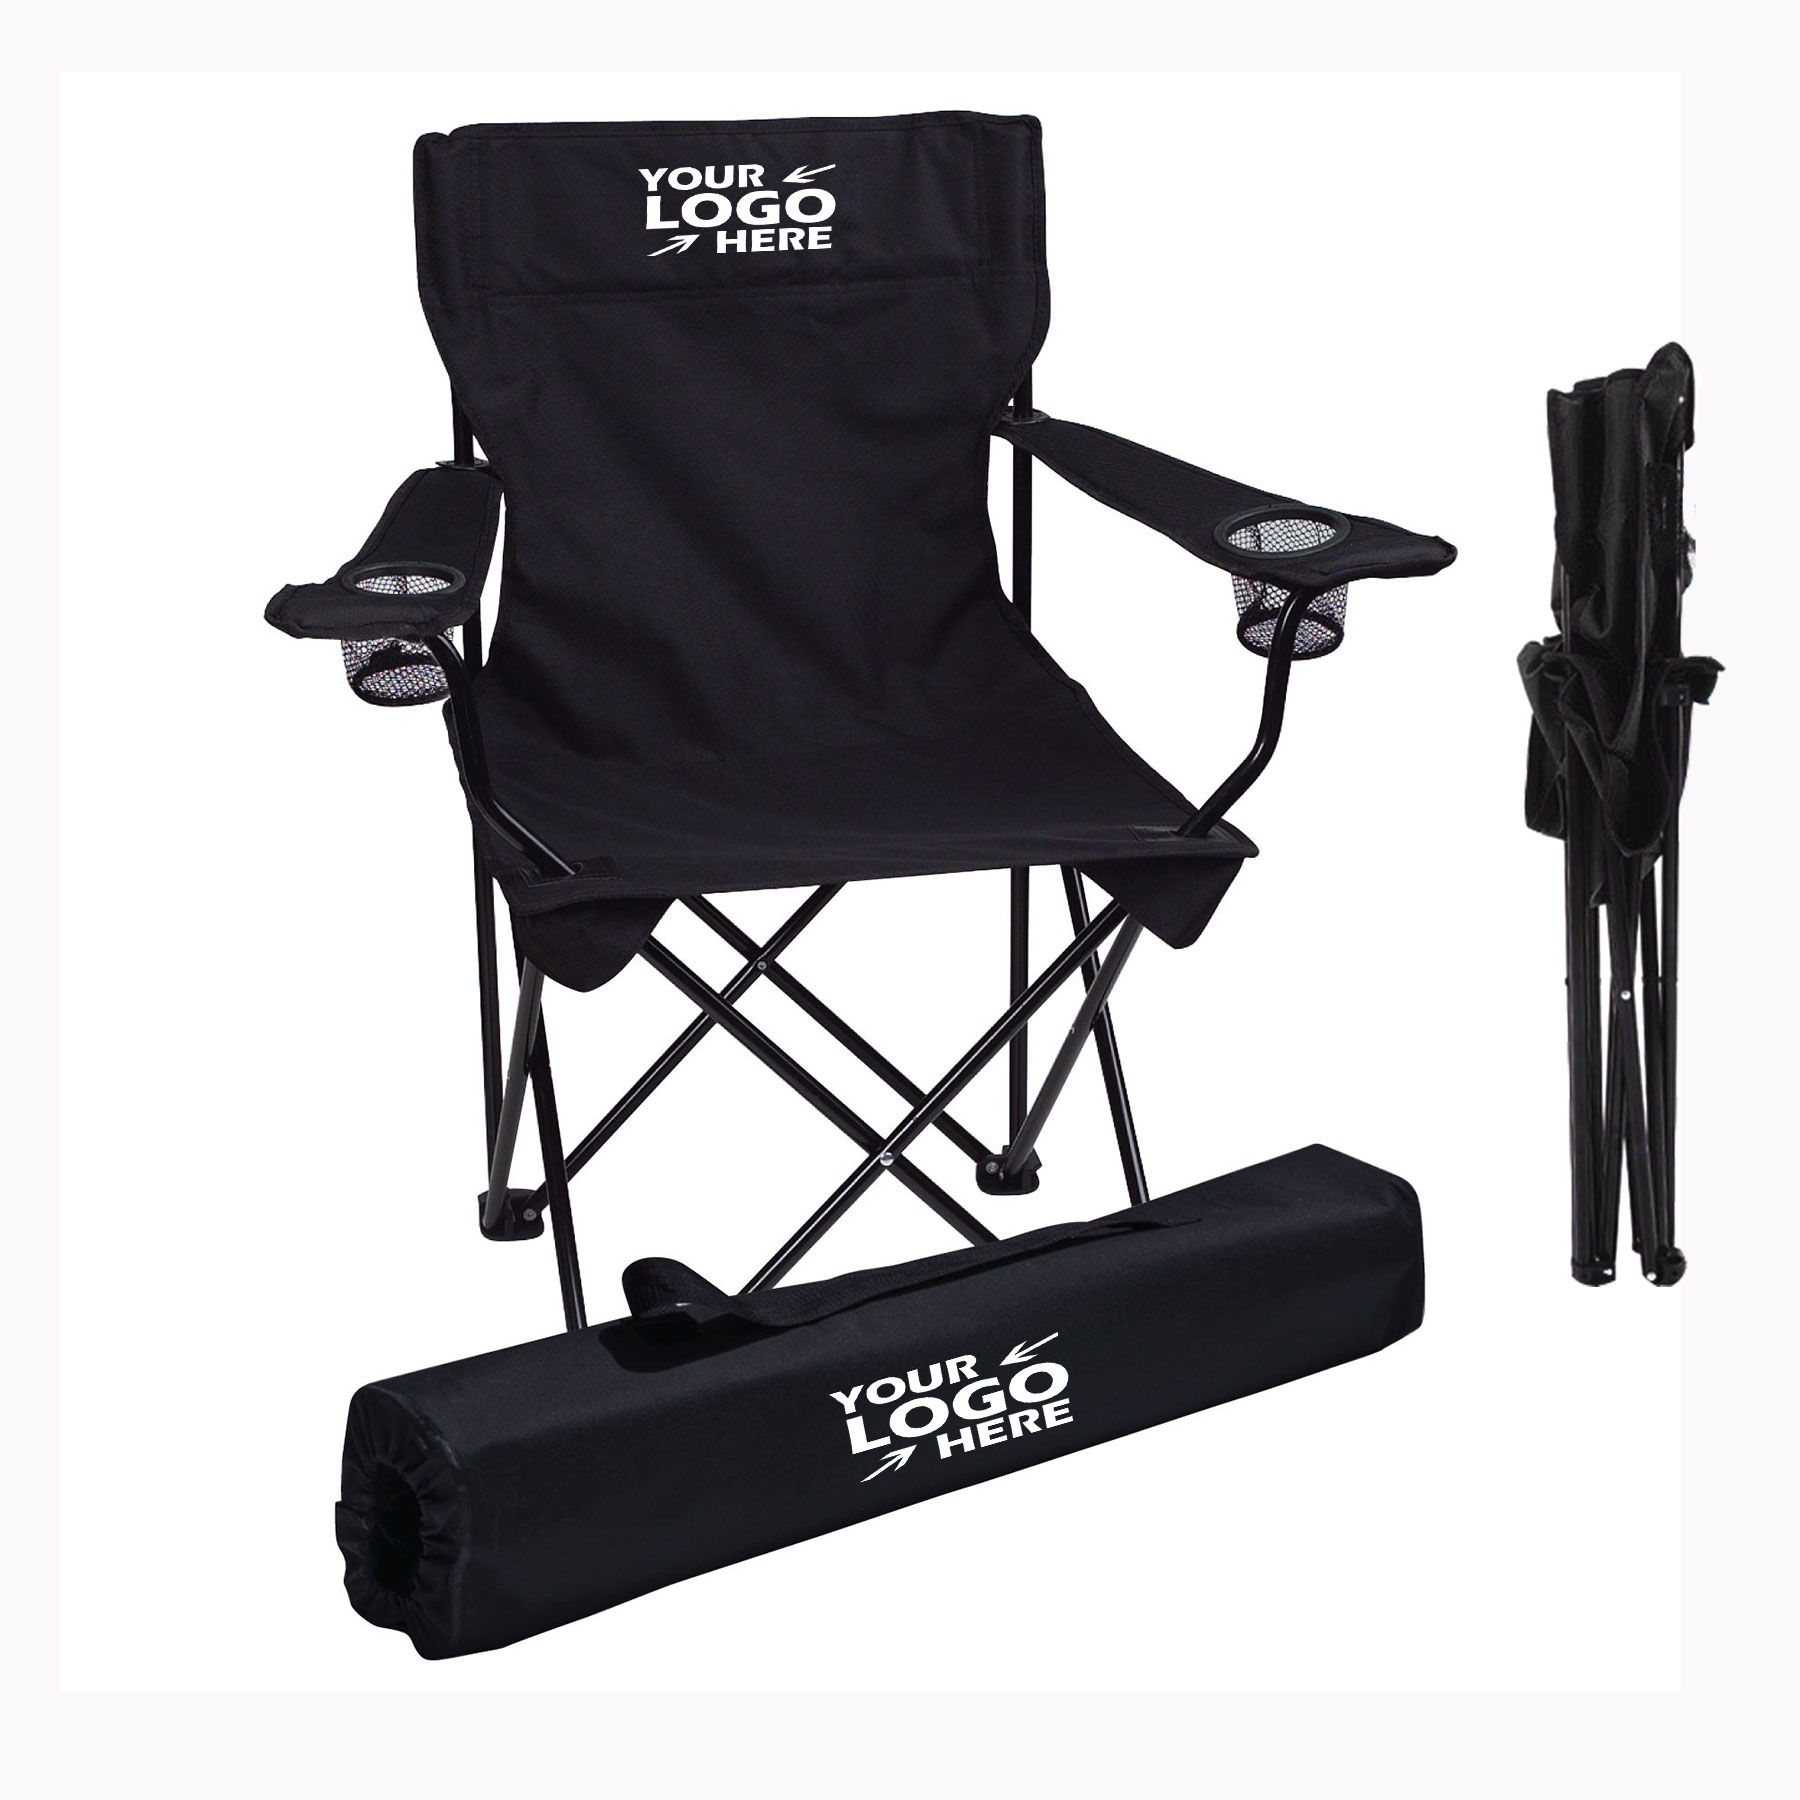 GL-GYT1002 Folding Event Chair with Carrying Bag